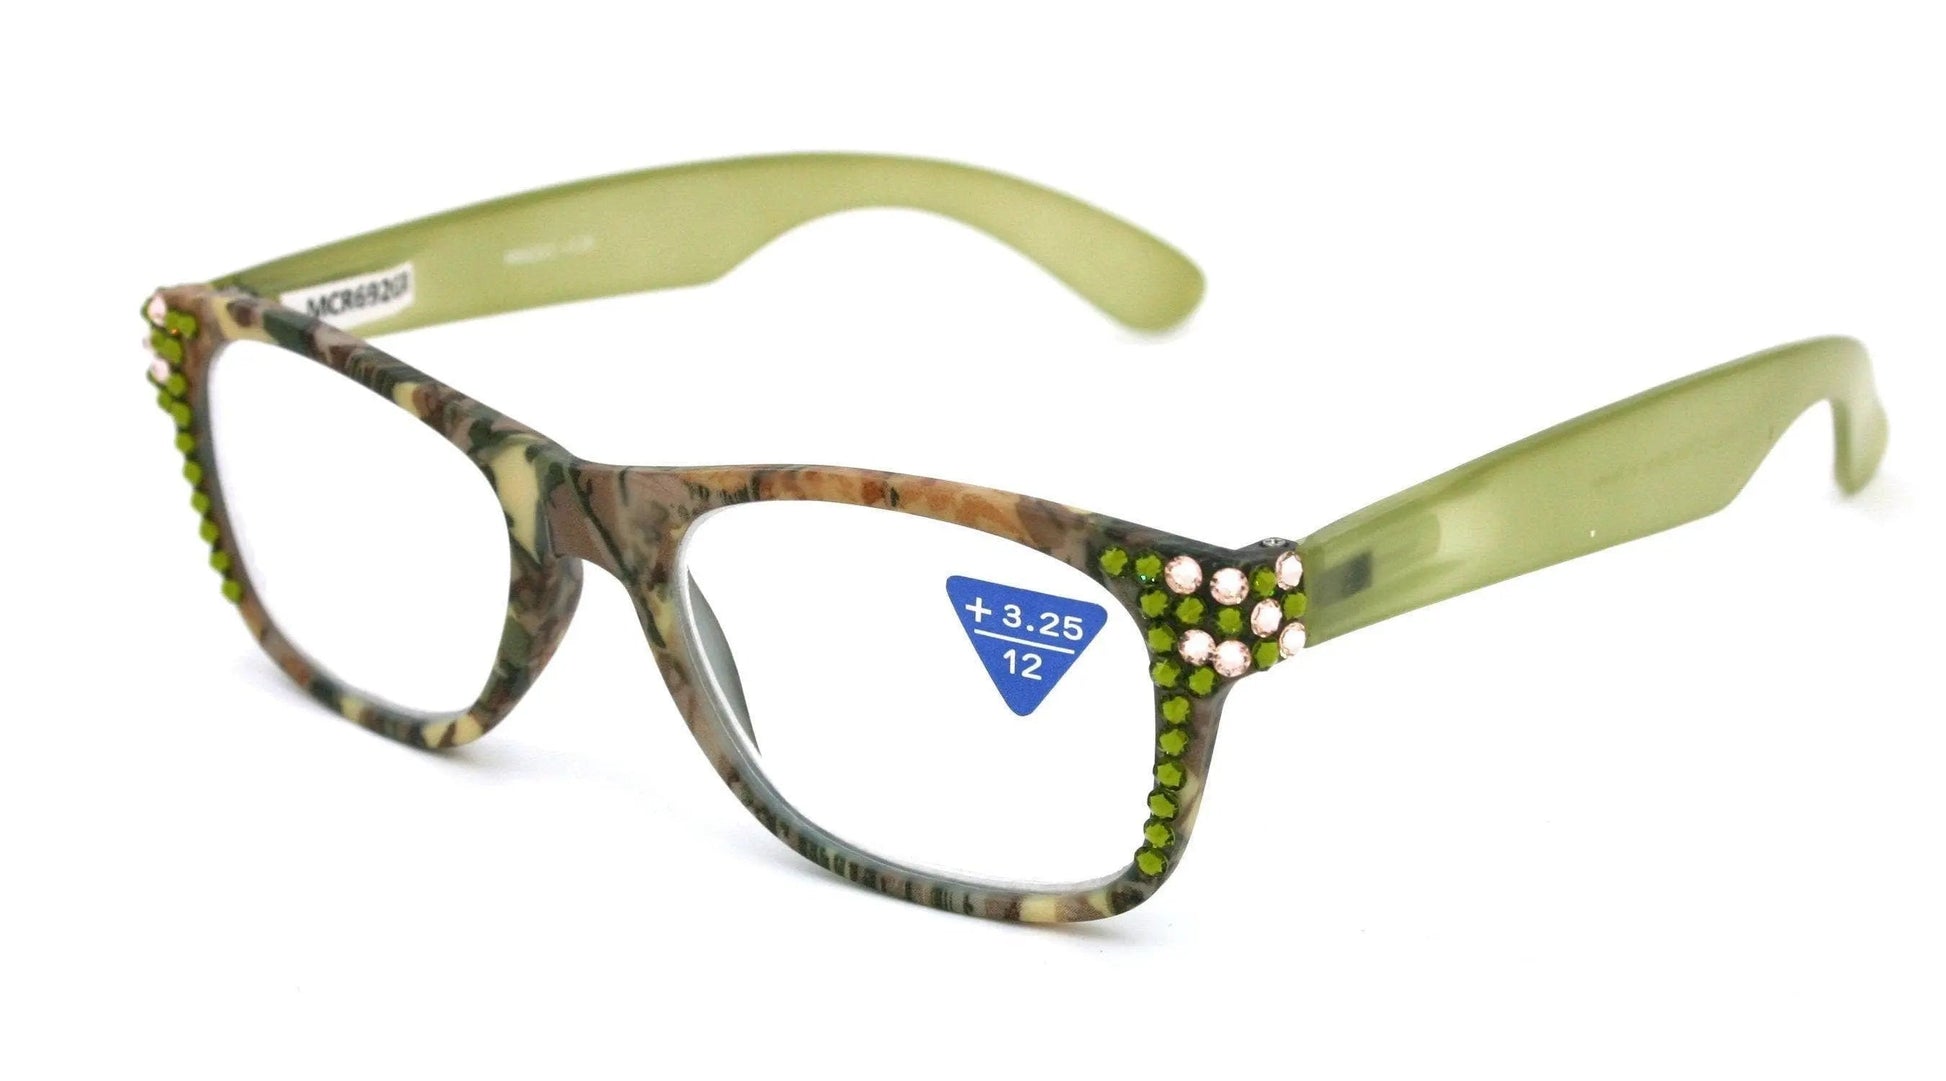 The Forester, (Bling) Reading Glasses For Women W (Olivine, Light Colorado) Genuine European Crystals. +1.25..+3 (Green Camouflage)